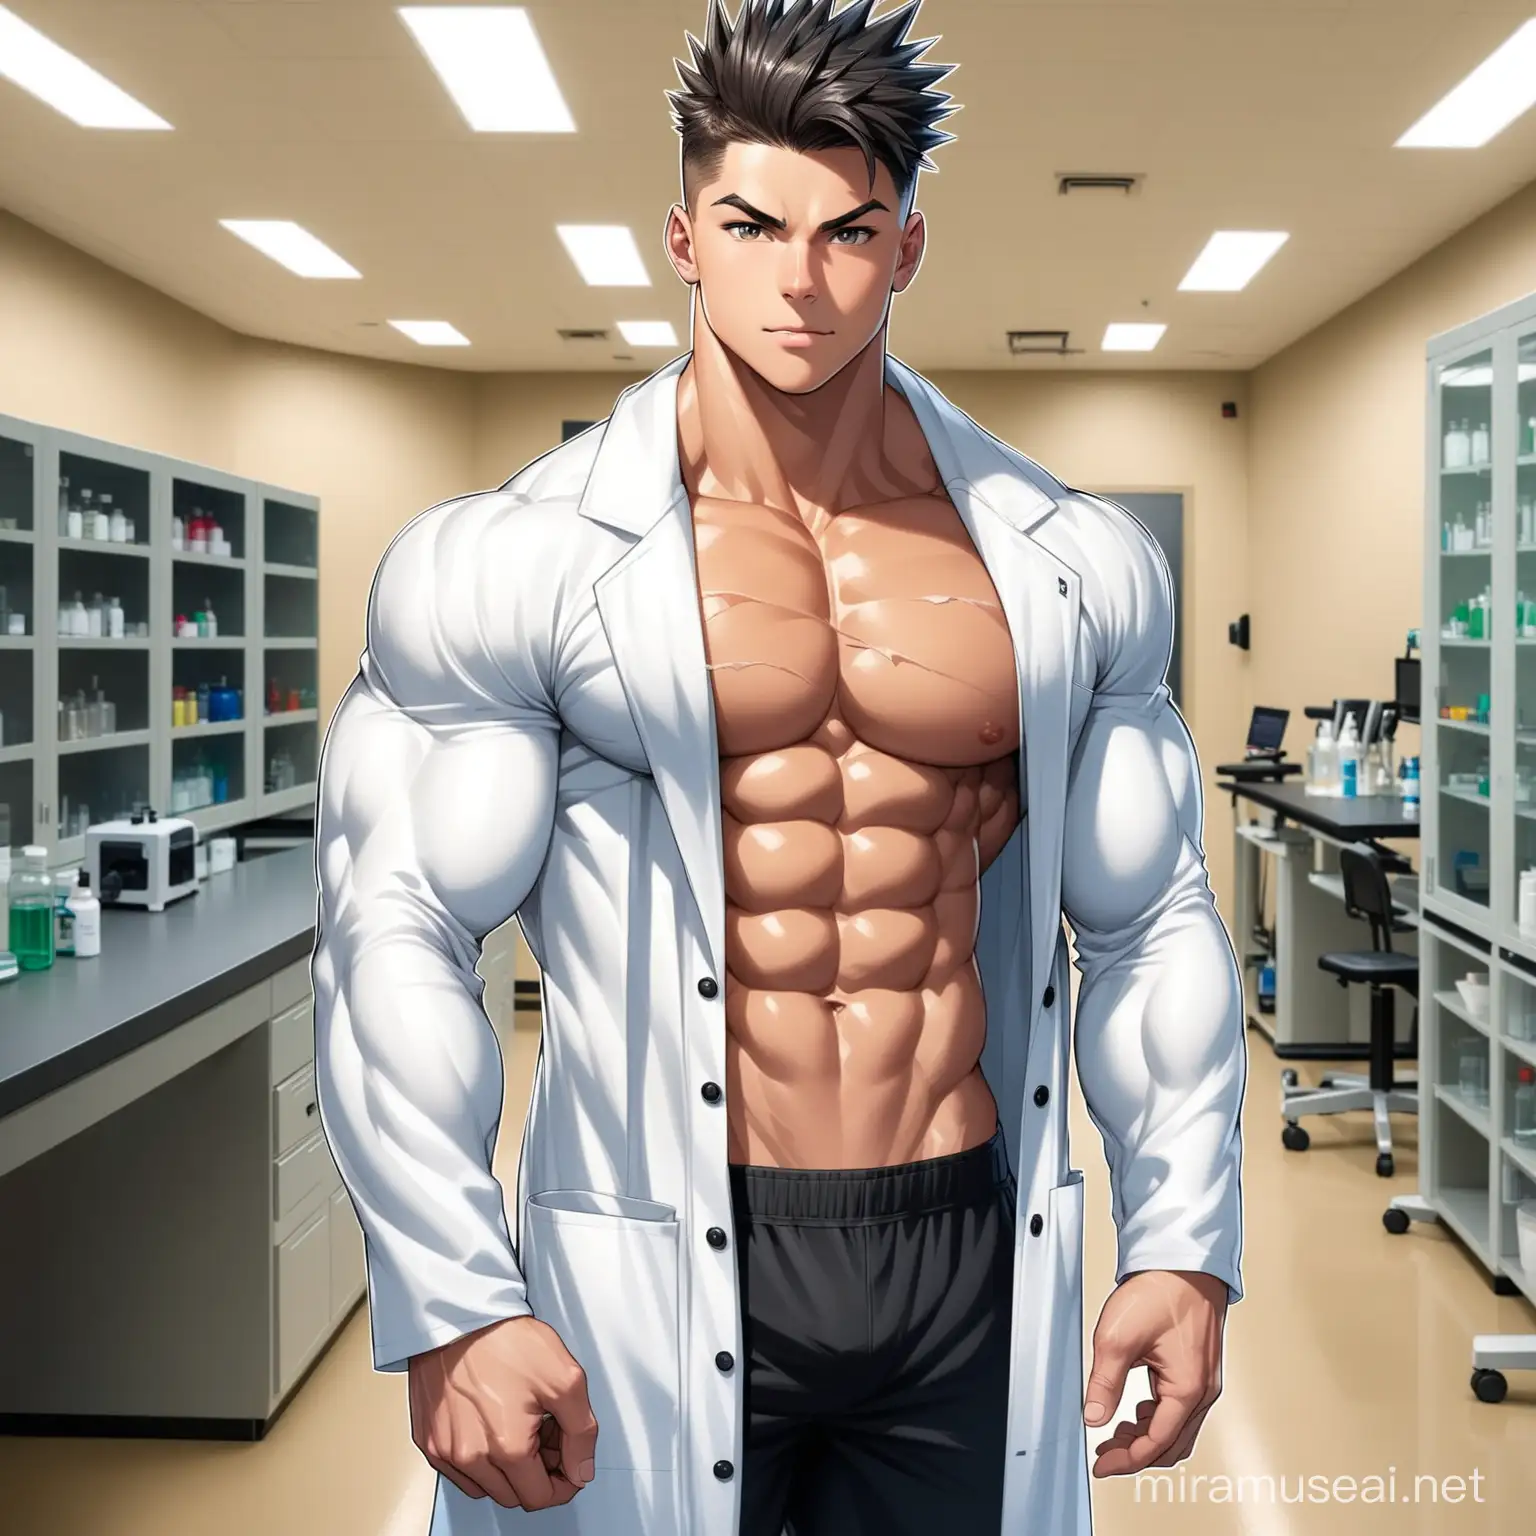 Teen muscle,muscular 16 year old male, black spiky haircut, white wide torn lab coat, lab scenery, 8 pack abs, muscular male body, extra huge body